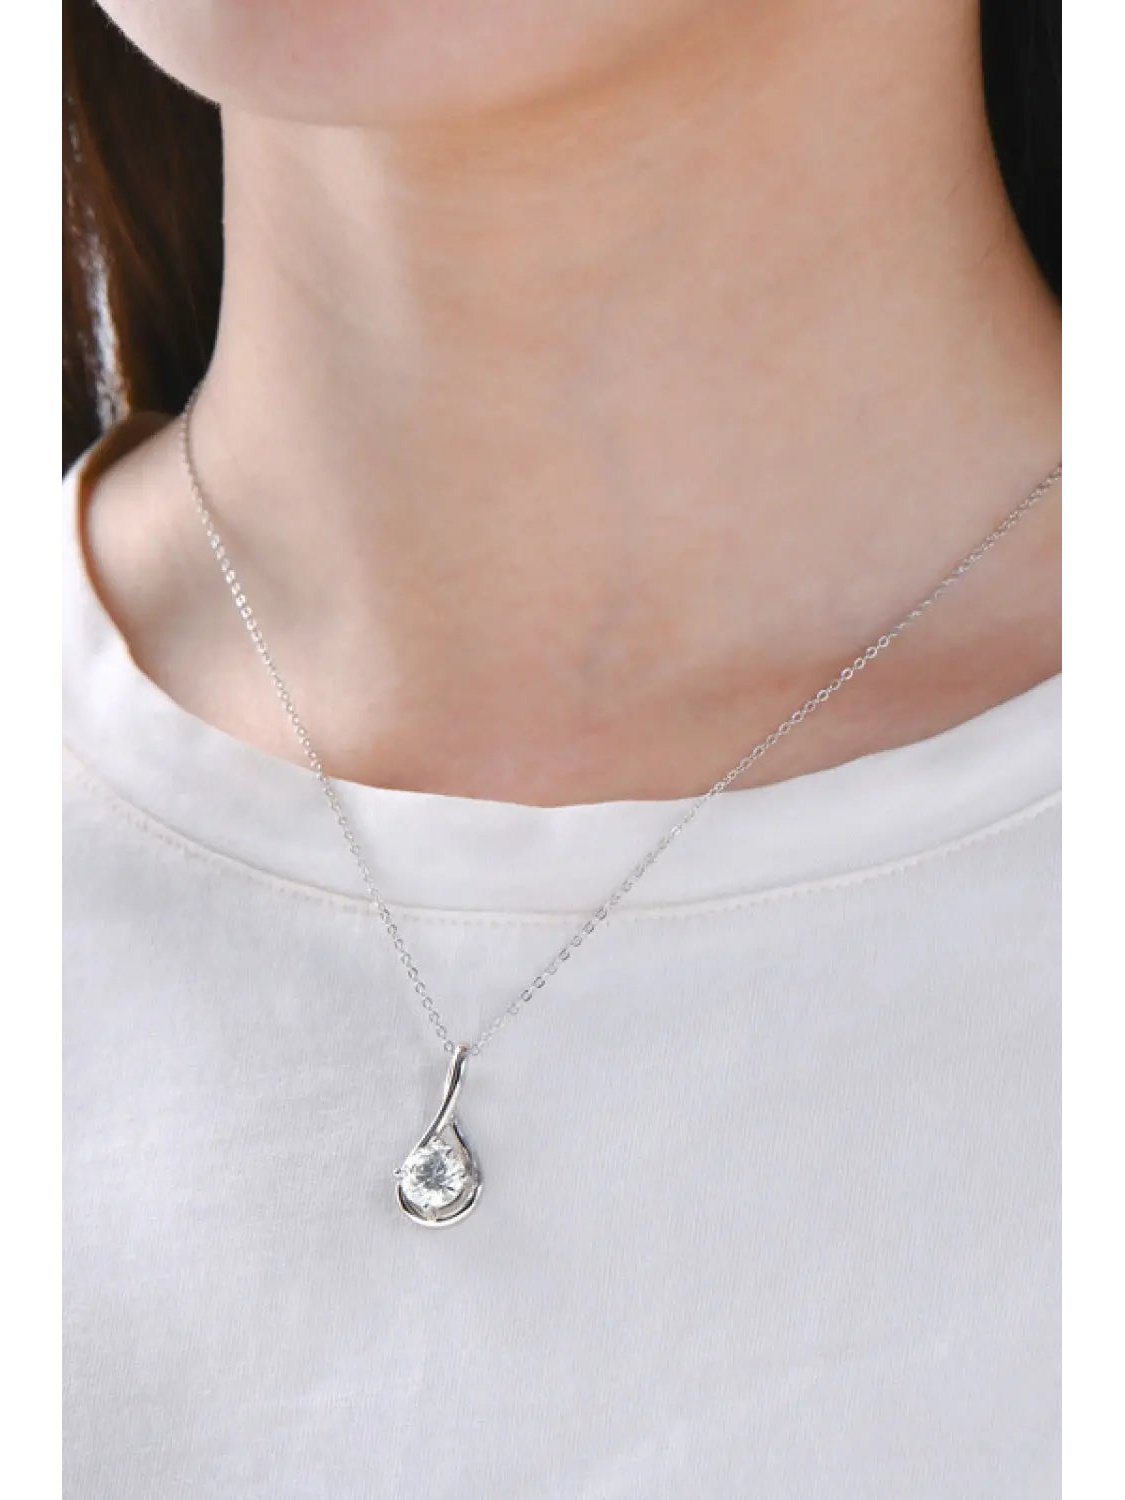 2 Carat Moissanite 925 Sterling Silver Necklace 